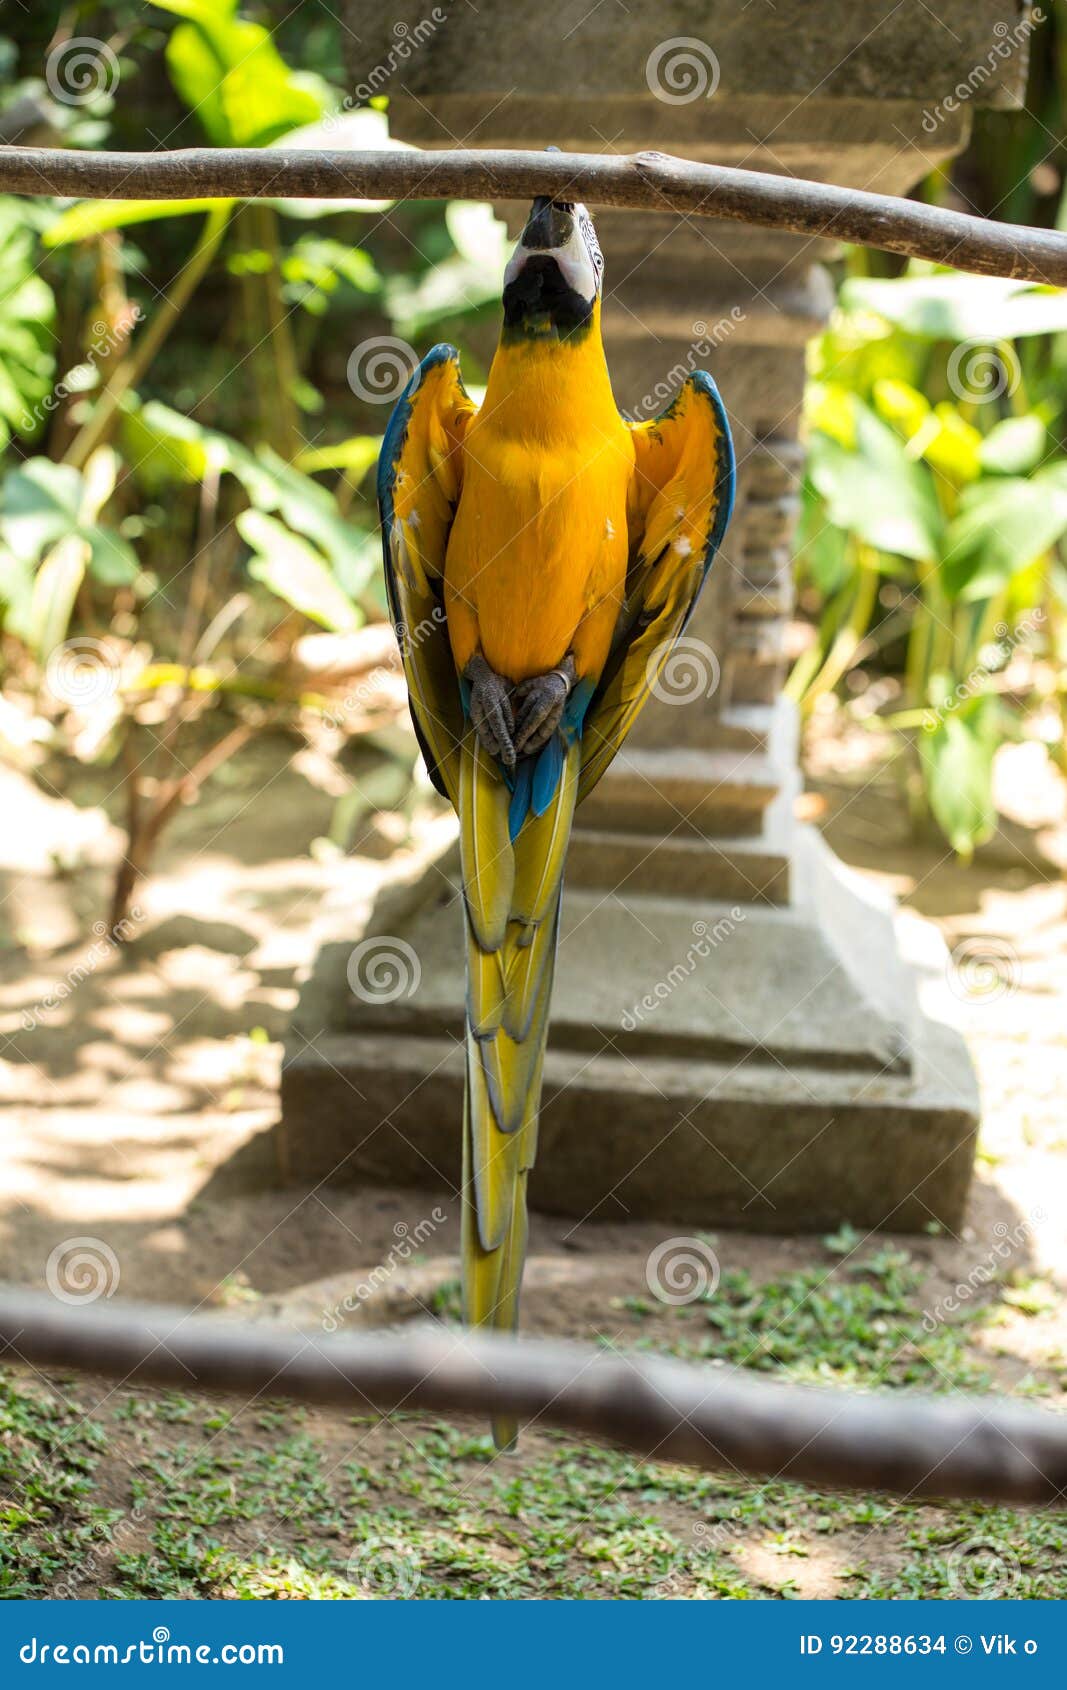 Parrot In Bali Island Indonesia - Nature Background. Stock Photo - Image of nature, animal: 92288634